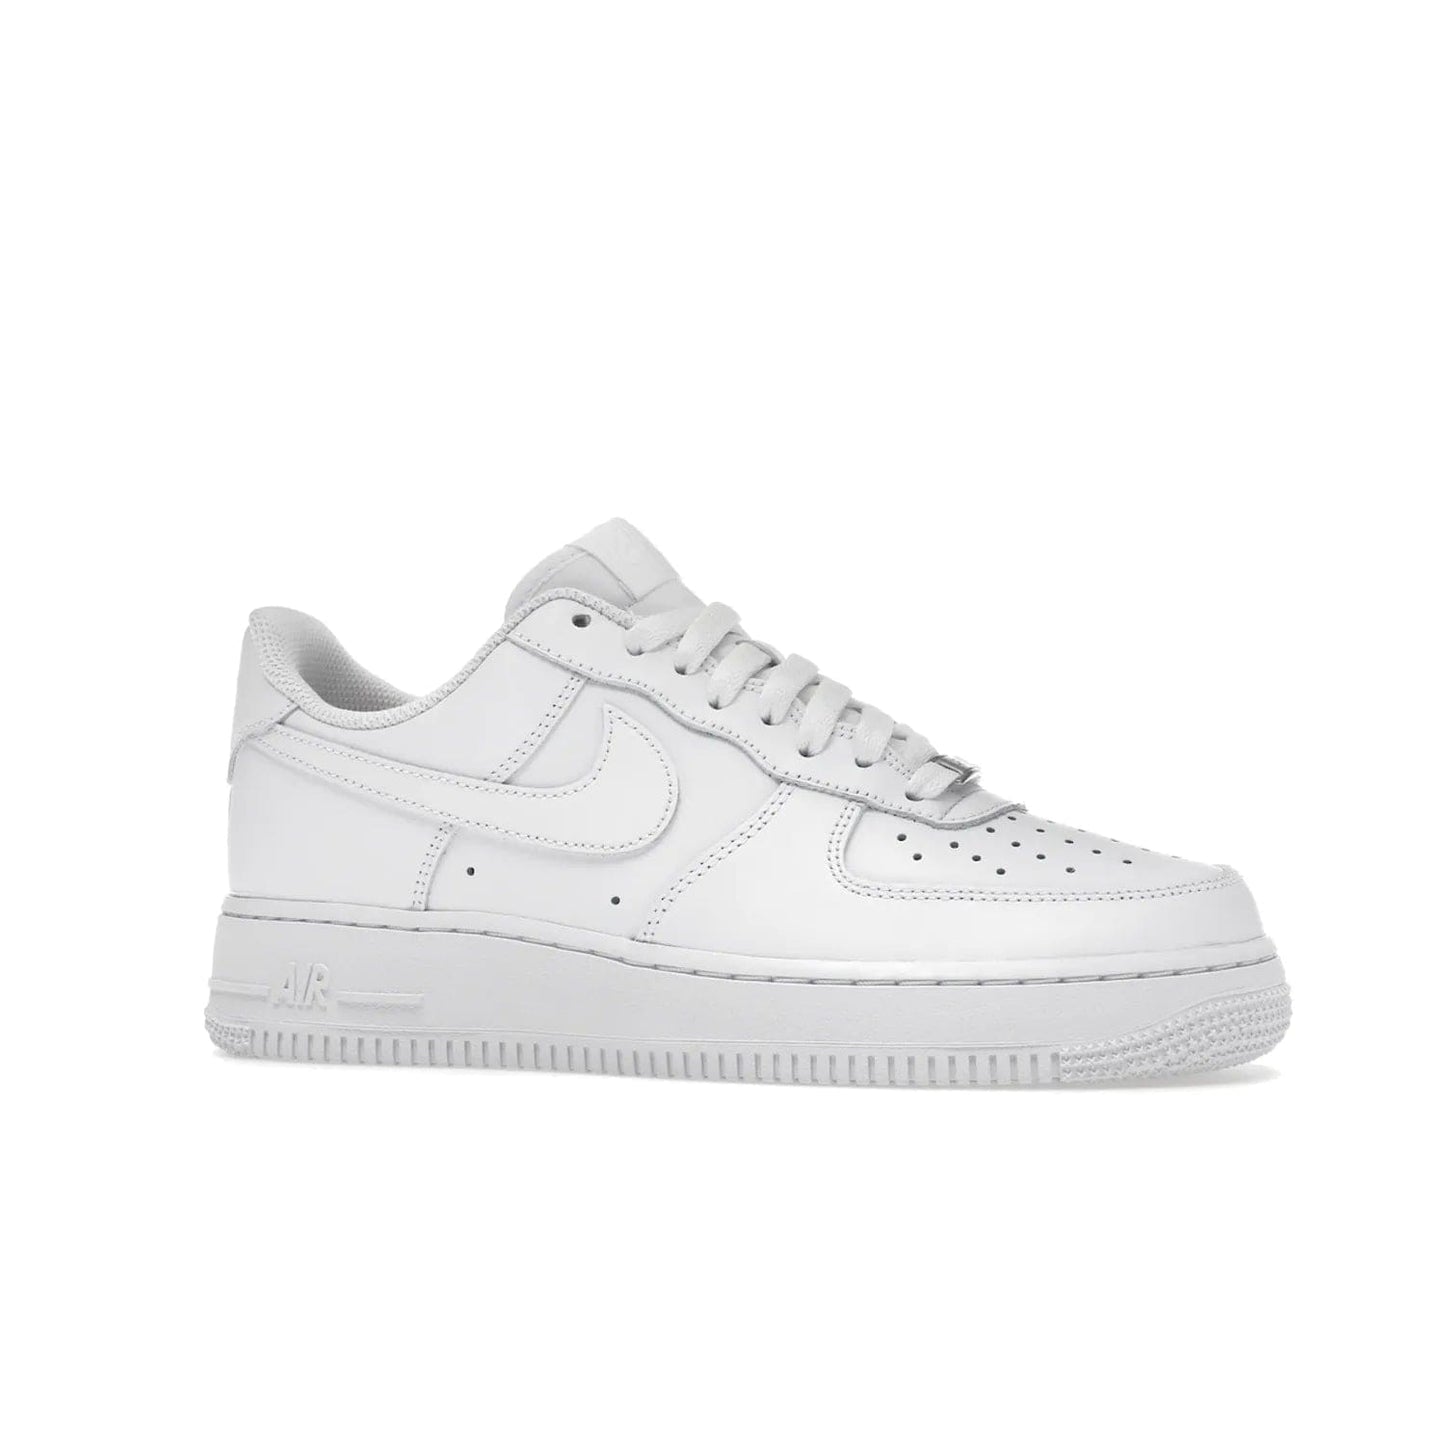 Nike Air Force 1 Low '07 White (Women's) - Image 3 - Only at www.BallersClubKickz.com - Timeless classic sneaker updated with white leather upper and perforated toe box. Nike heel embroidery and white sole. Released January 2018.